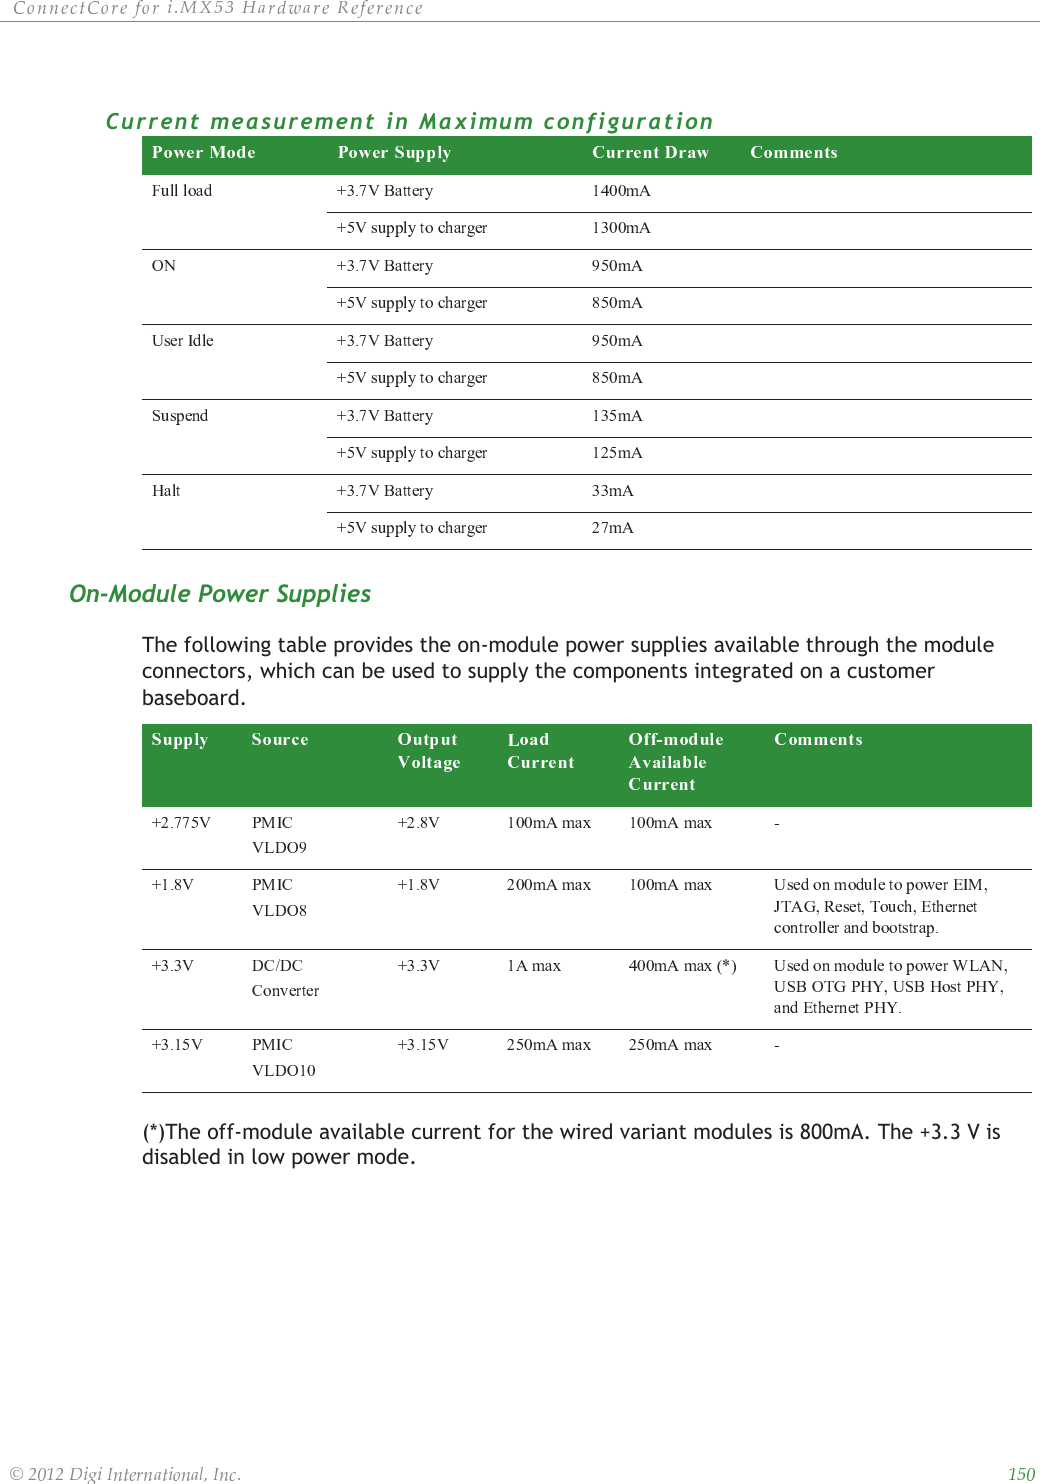 ȱ ȱ ȱ ȱ ȱ ȱȱ ȱ ȱ ȱ ȱȱȱCurrent measurement  in Maximum con figurationOn-Module Power SuppliesThe following table provides the on-module power supplies available through the module connectors, which can be used to supply the components integrated on a customer baseboard. (*)The off-module available current for the wired variant modules is 800mA. The +3.3 V is disabled in low power mode.